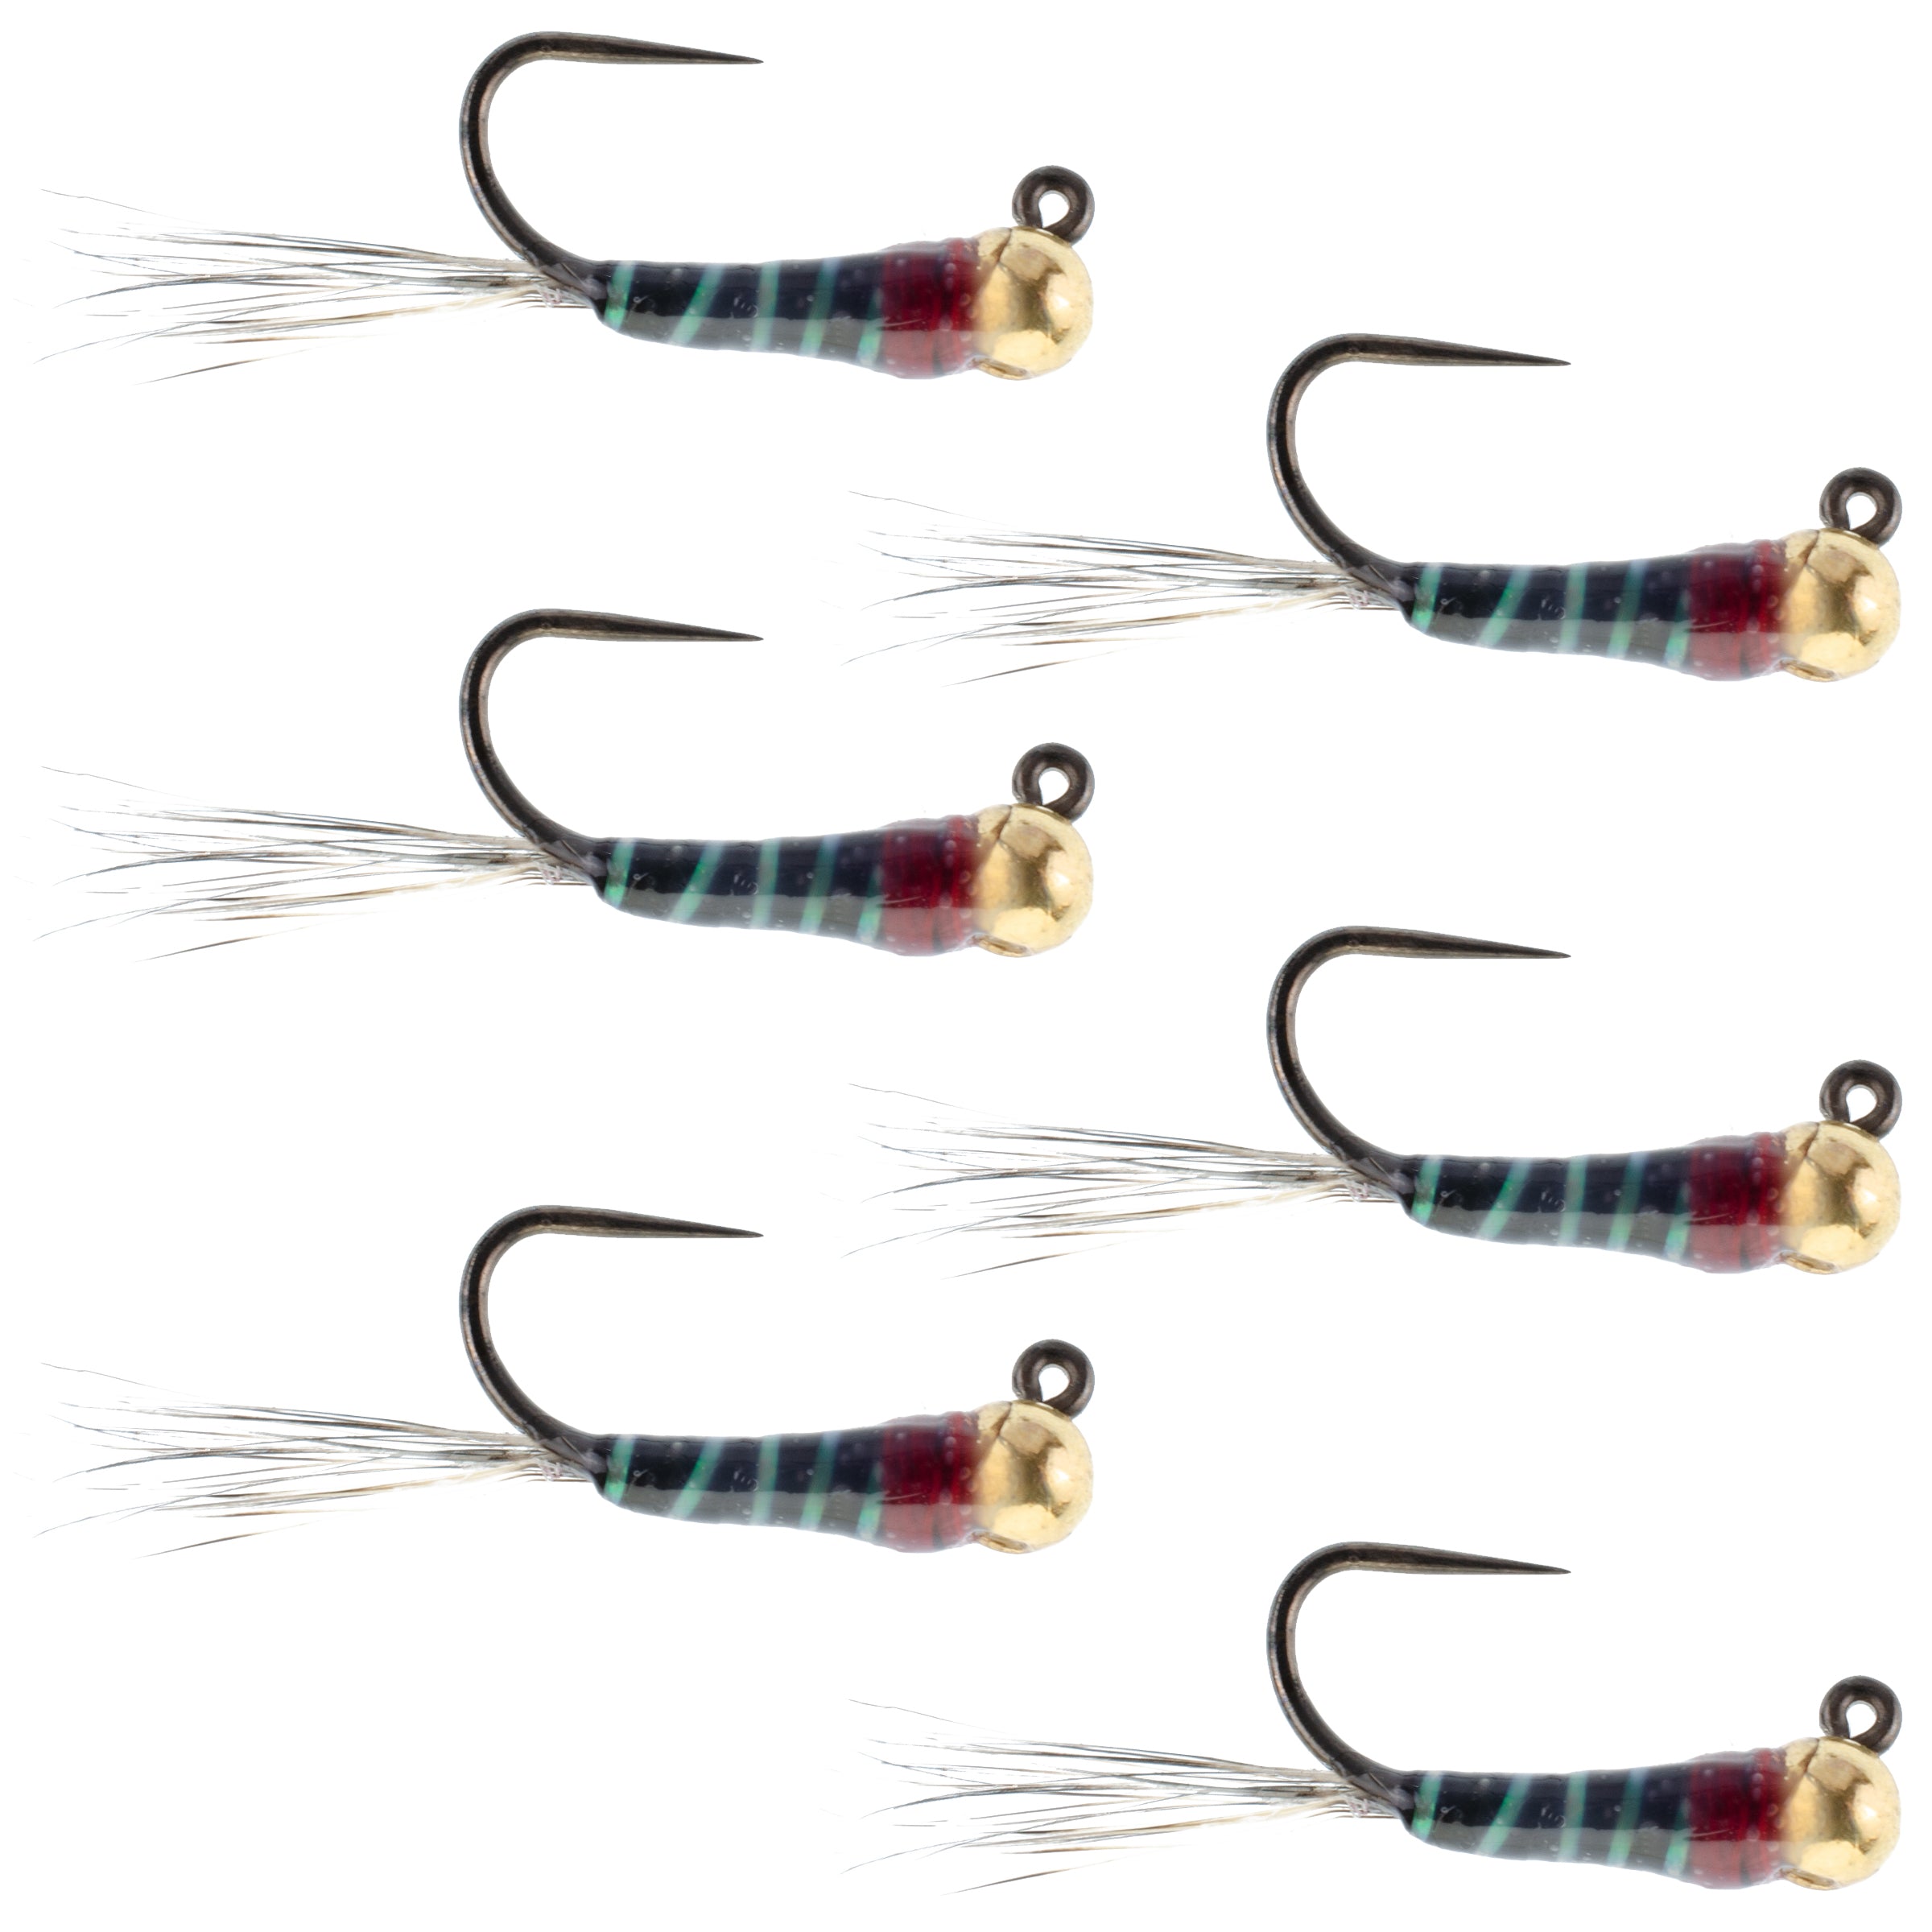 The Fly Fishing Place Tactical Czech Nymph Fly Fishing Flies Collection - One Dozen Tungsten Bead Euro Nymphing Fly Assortment - 2 Each of 6 Patterns